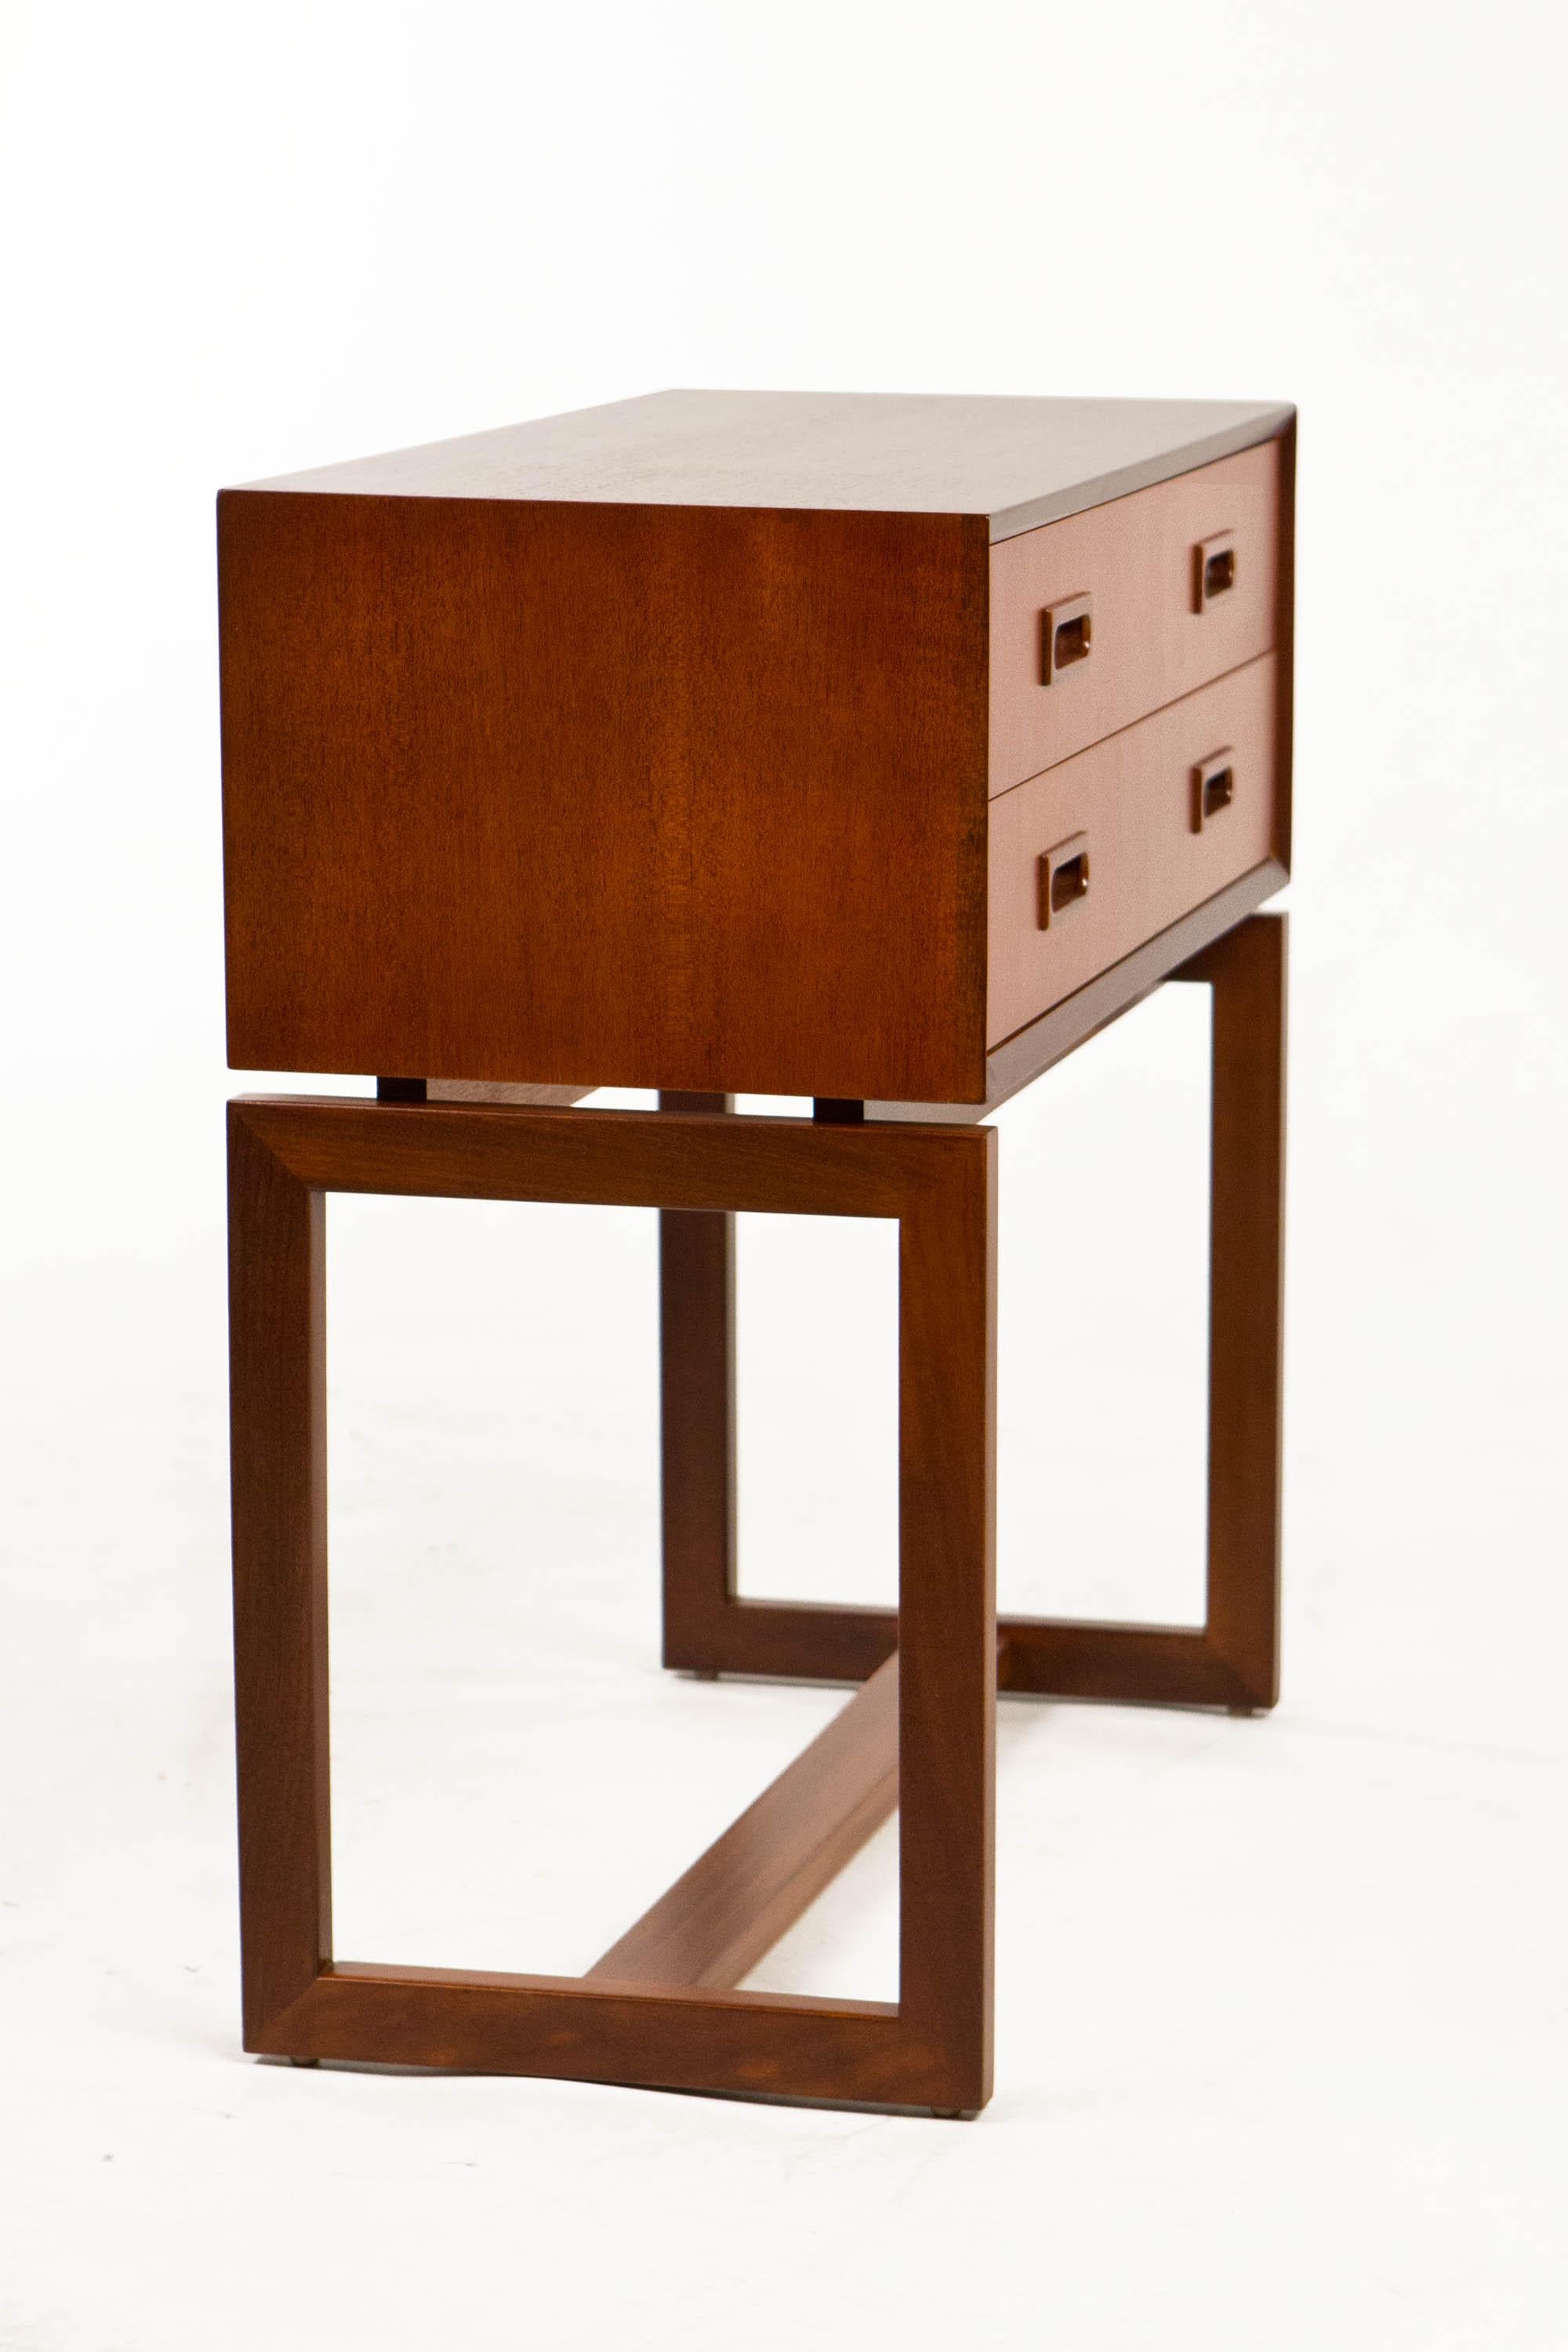 Teak Two Drawer Bureau with Beveled Edge, Danish Design 1950's In Good Condition For Sale In Los Angeles, CA